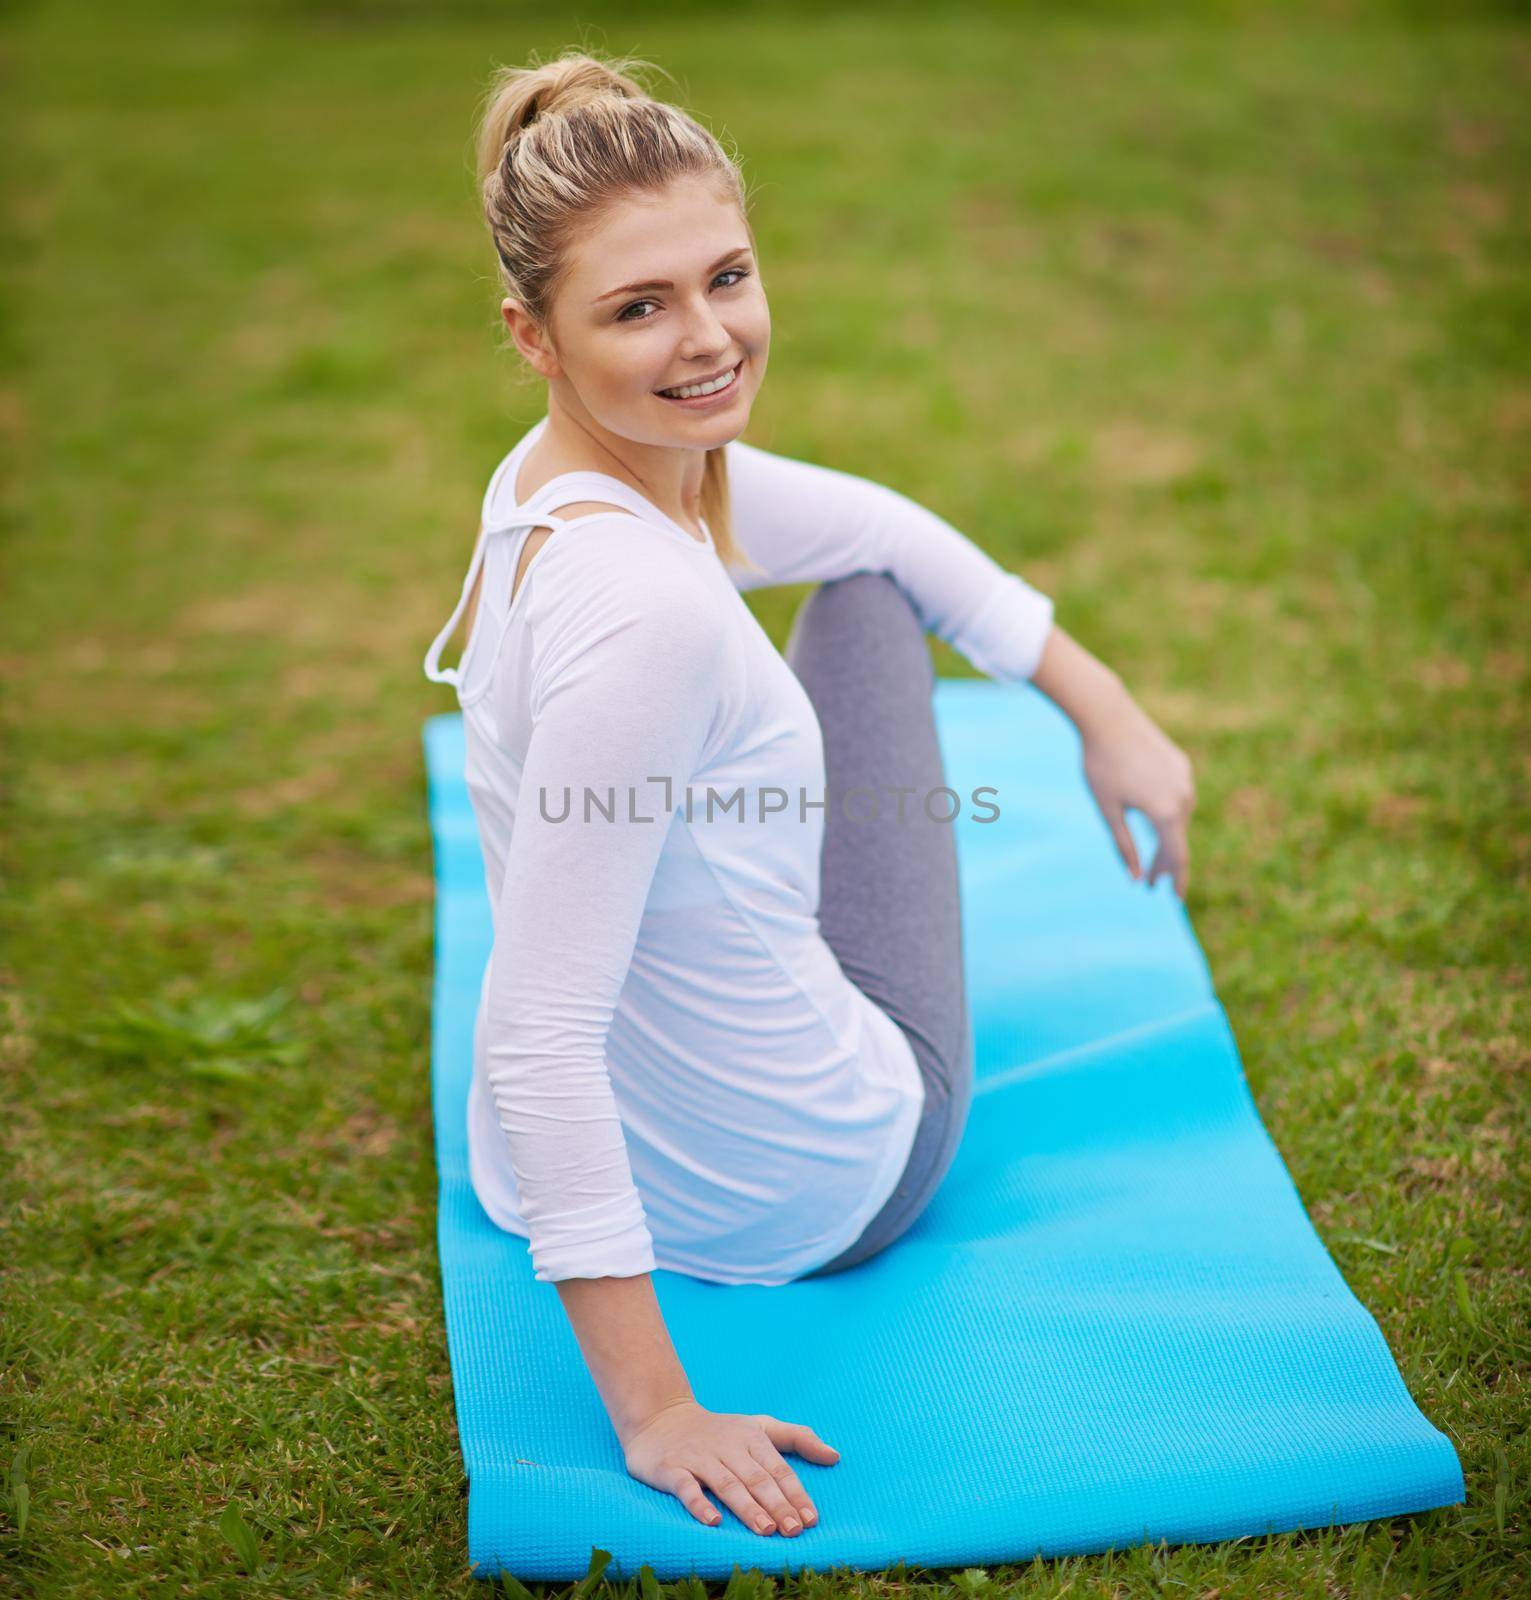 Yoga is part of my daily routine. a young woman doing yoga in the outdoors